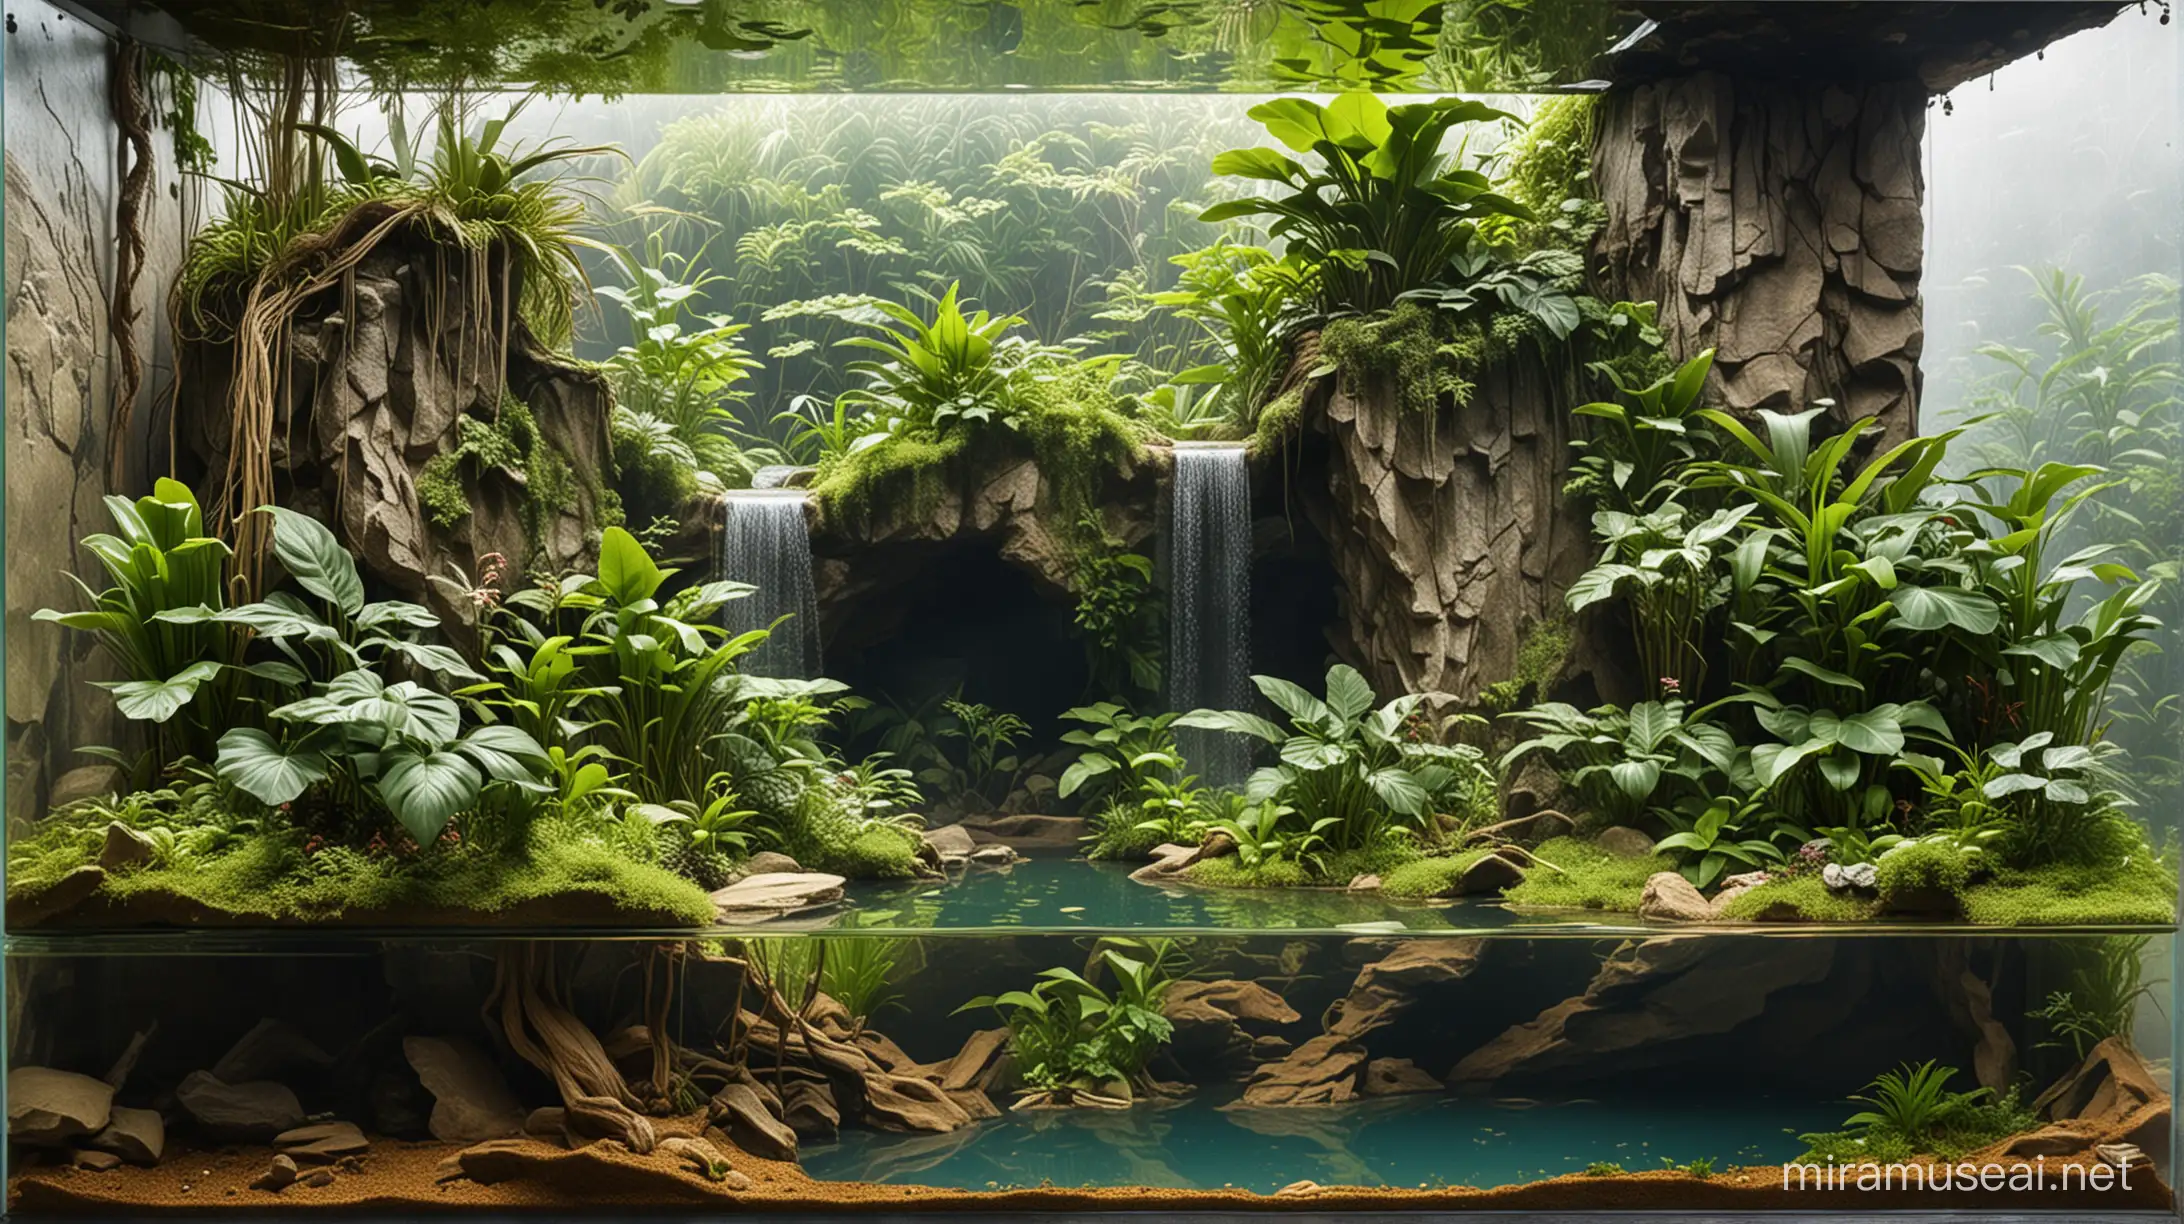 Tropical snake paludarium with high cliff waterfall and narrow lake-side and a large land area for the snake to bask in the sun.